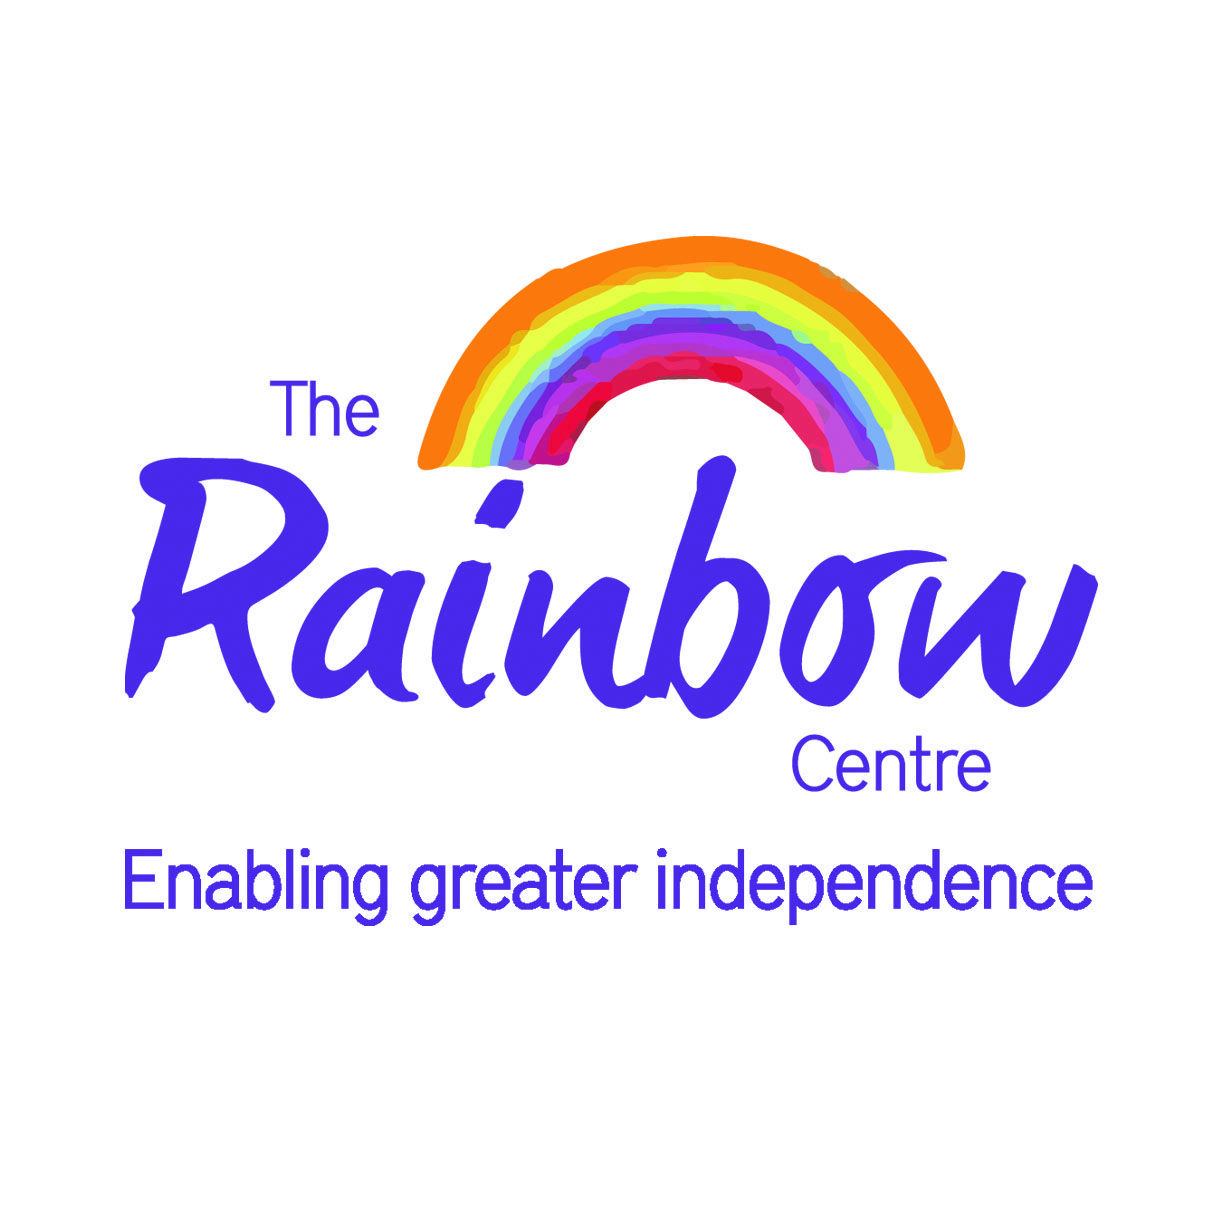 Rainbow Square Logo - Corporate Archives - The Rainbow CentreThe Rainbow Centre